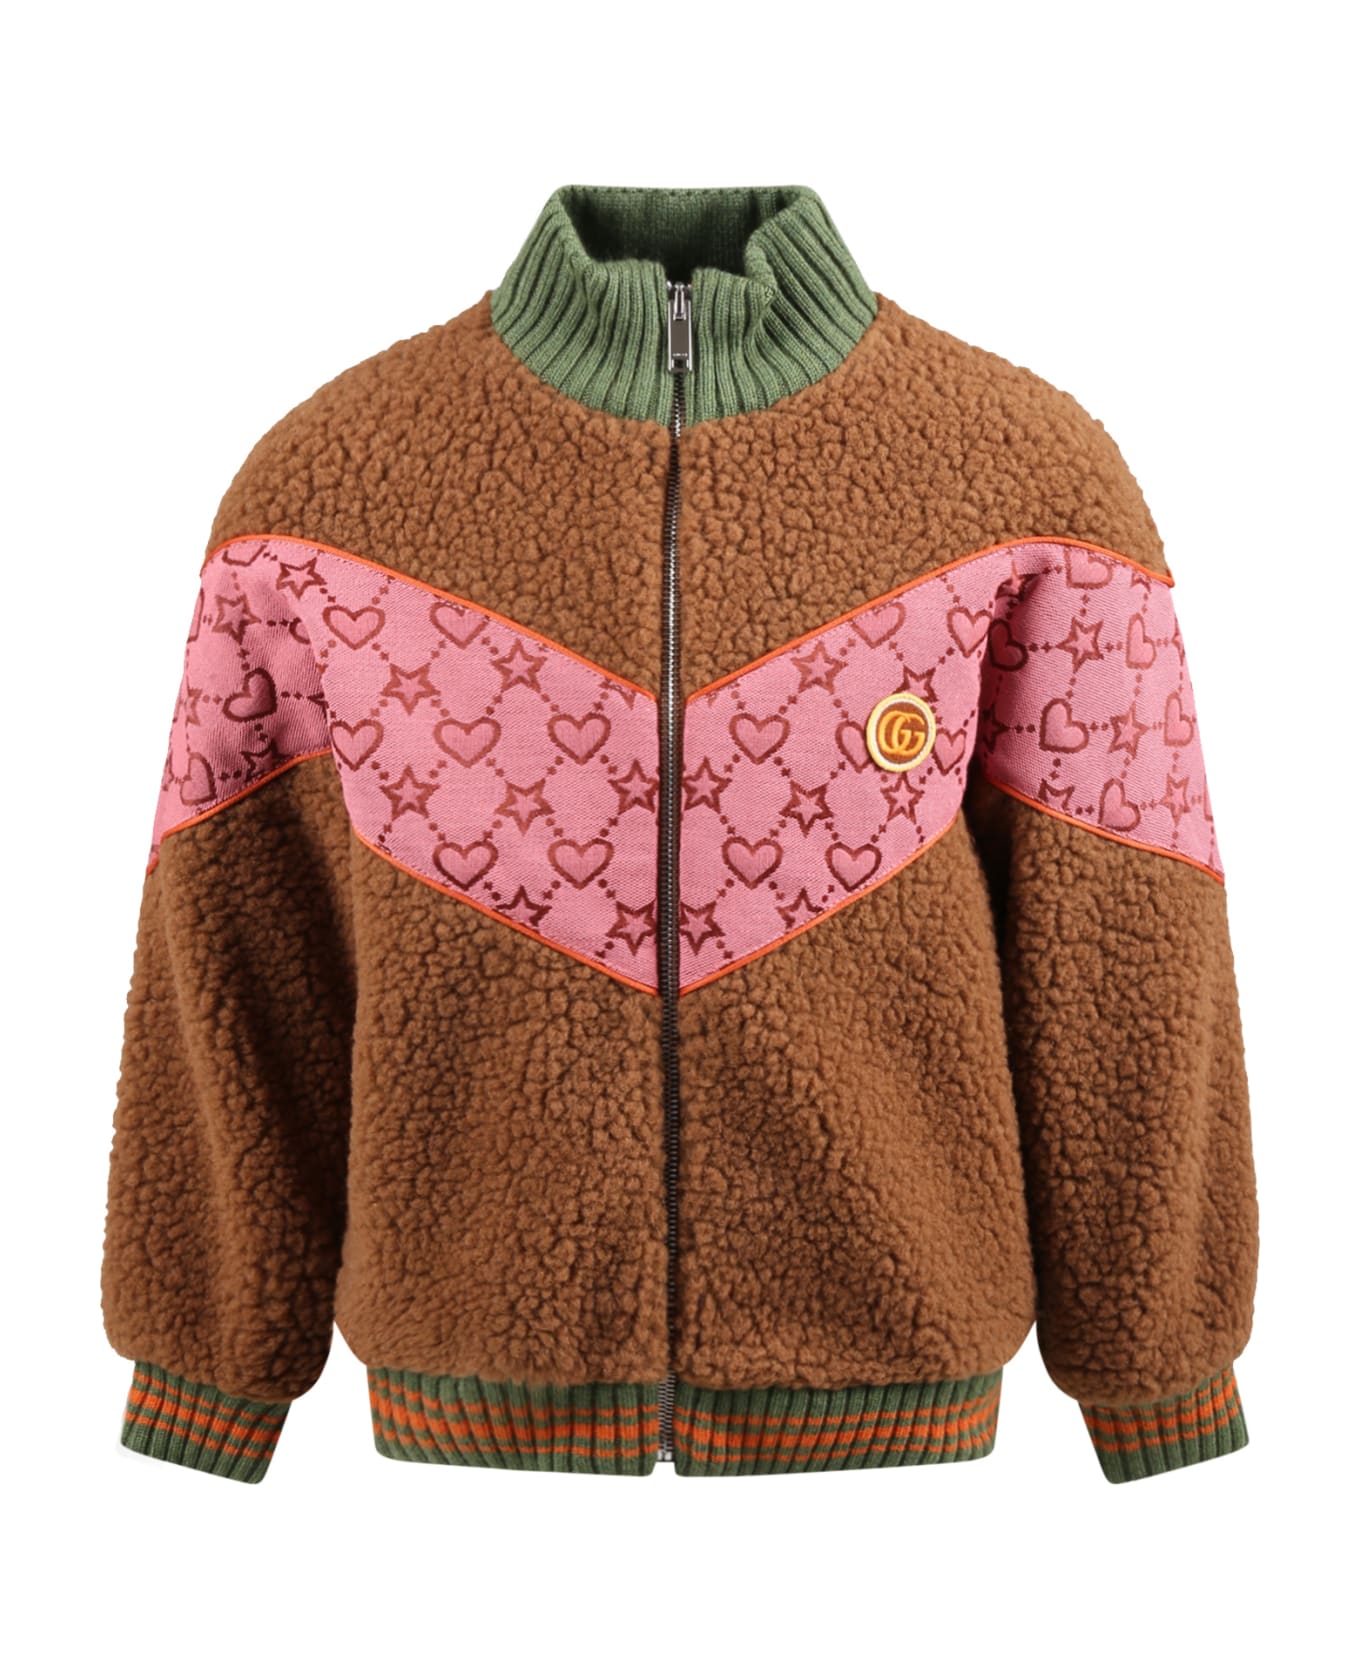 Gucci Brown Jacket For Girl With Hearts And Stars Motif - Brown